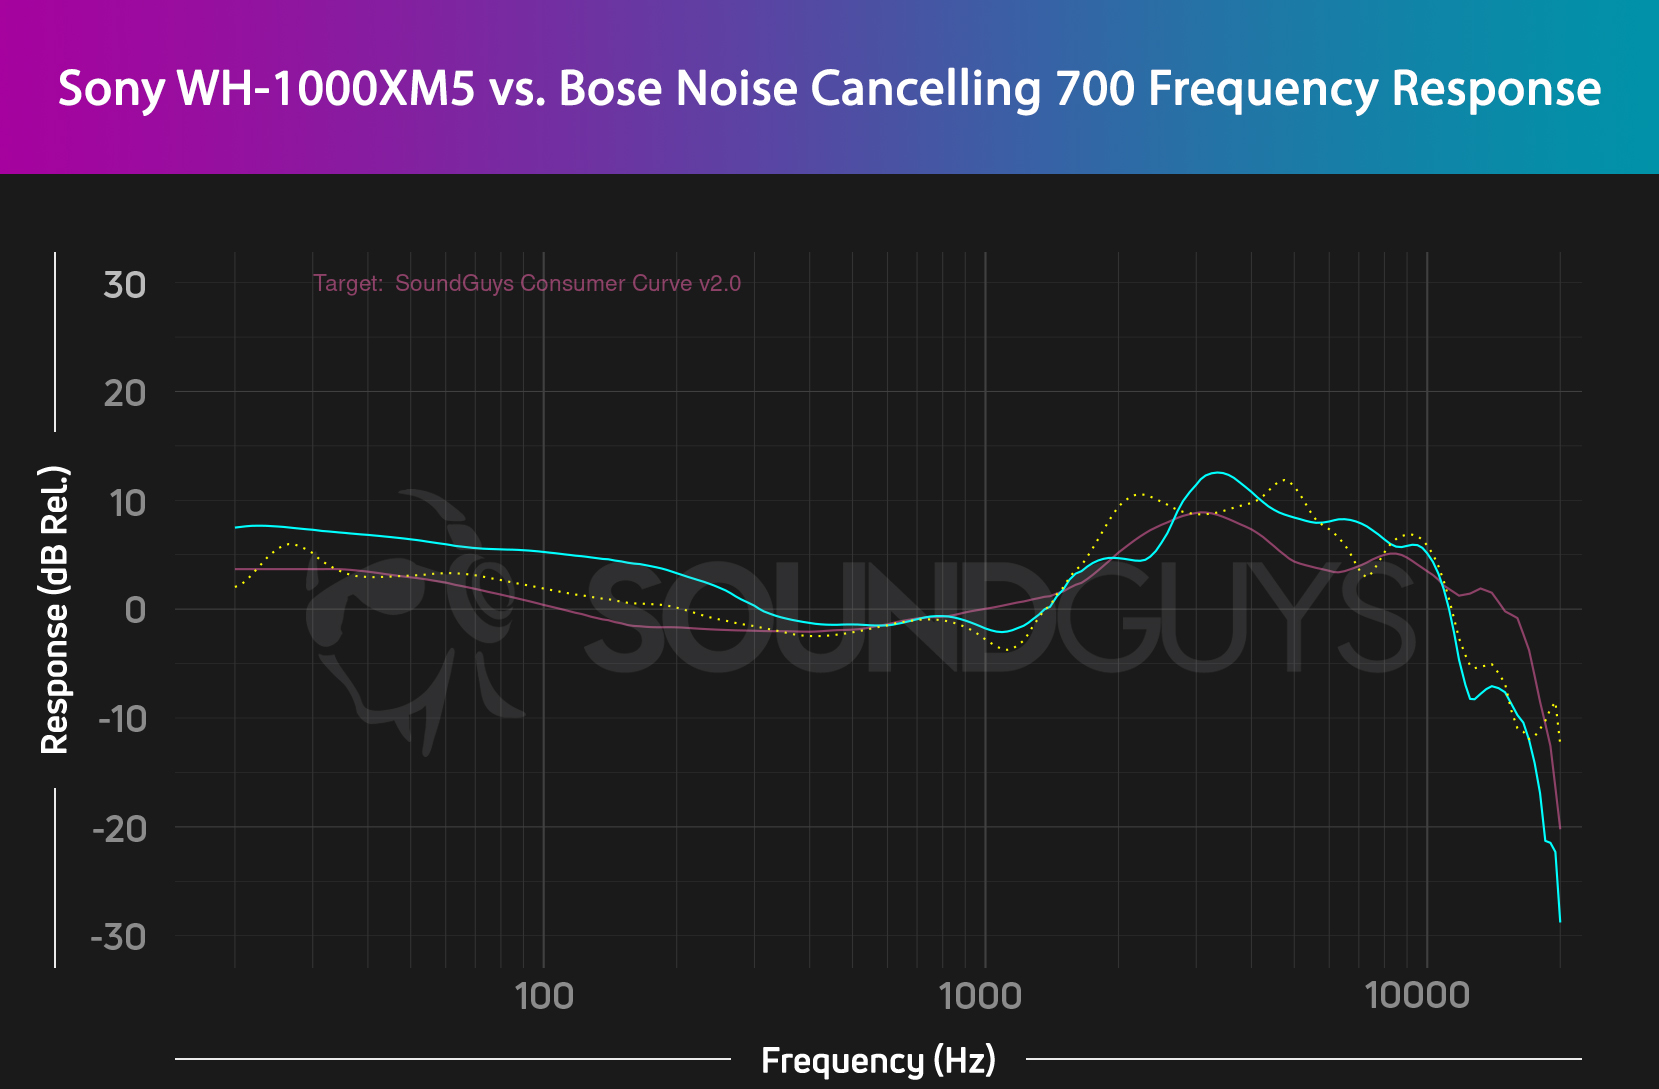 A frequency response chart for the Sony WH-1000XM5 shown in cyan and the Bose Noise Canceling 700 shown with a dotted yellow line. The chart shows that the Sony headphones boost bass more than the Bose headphones.